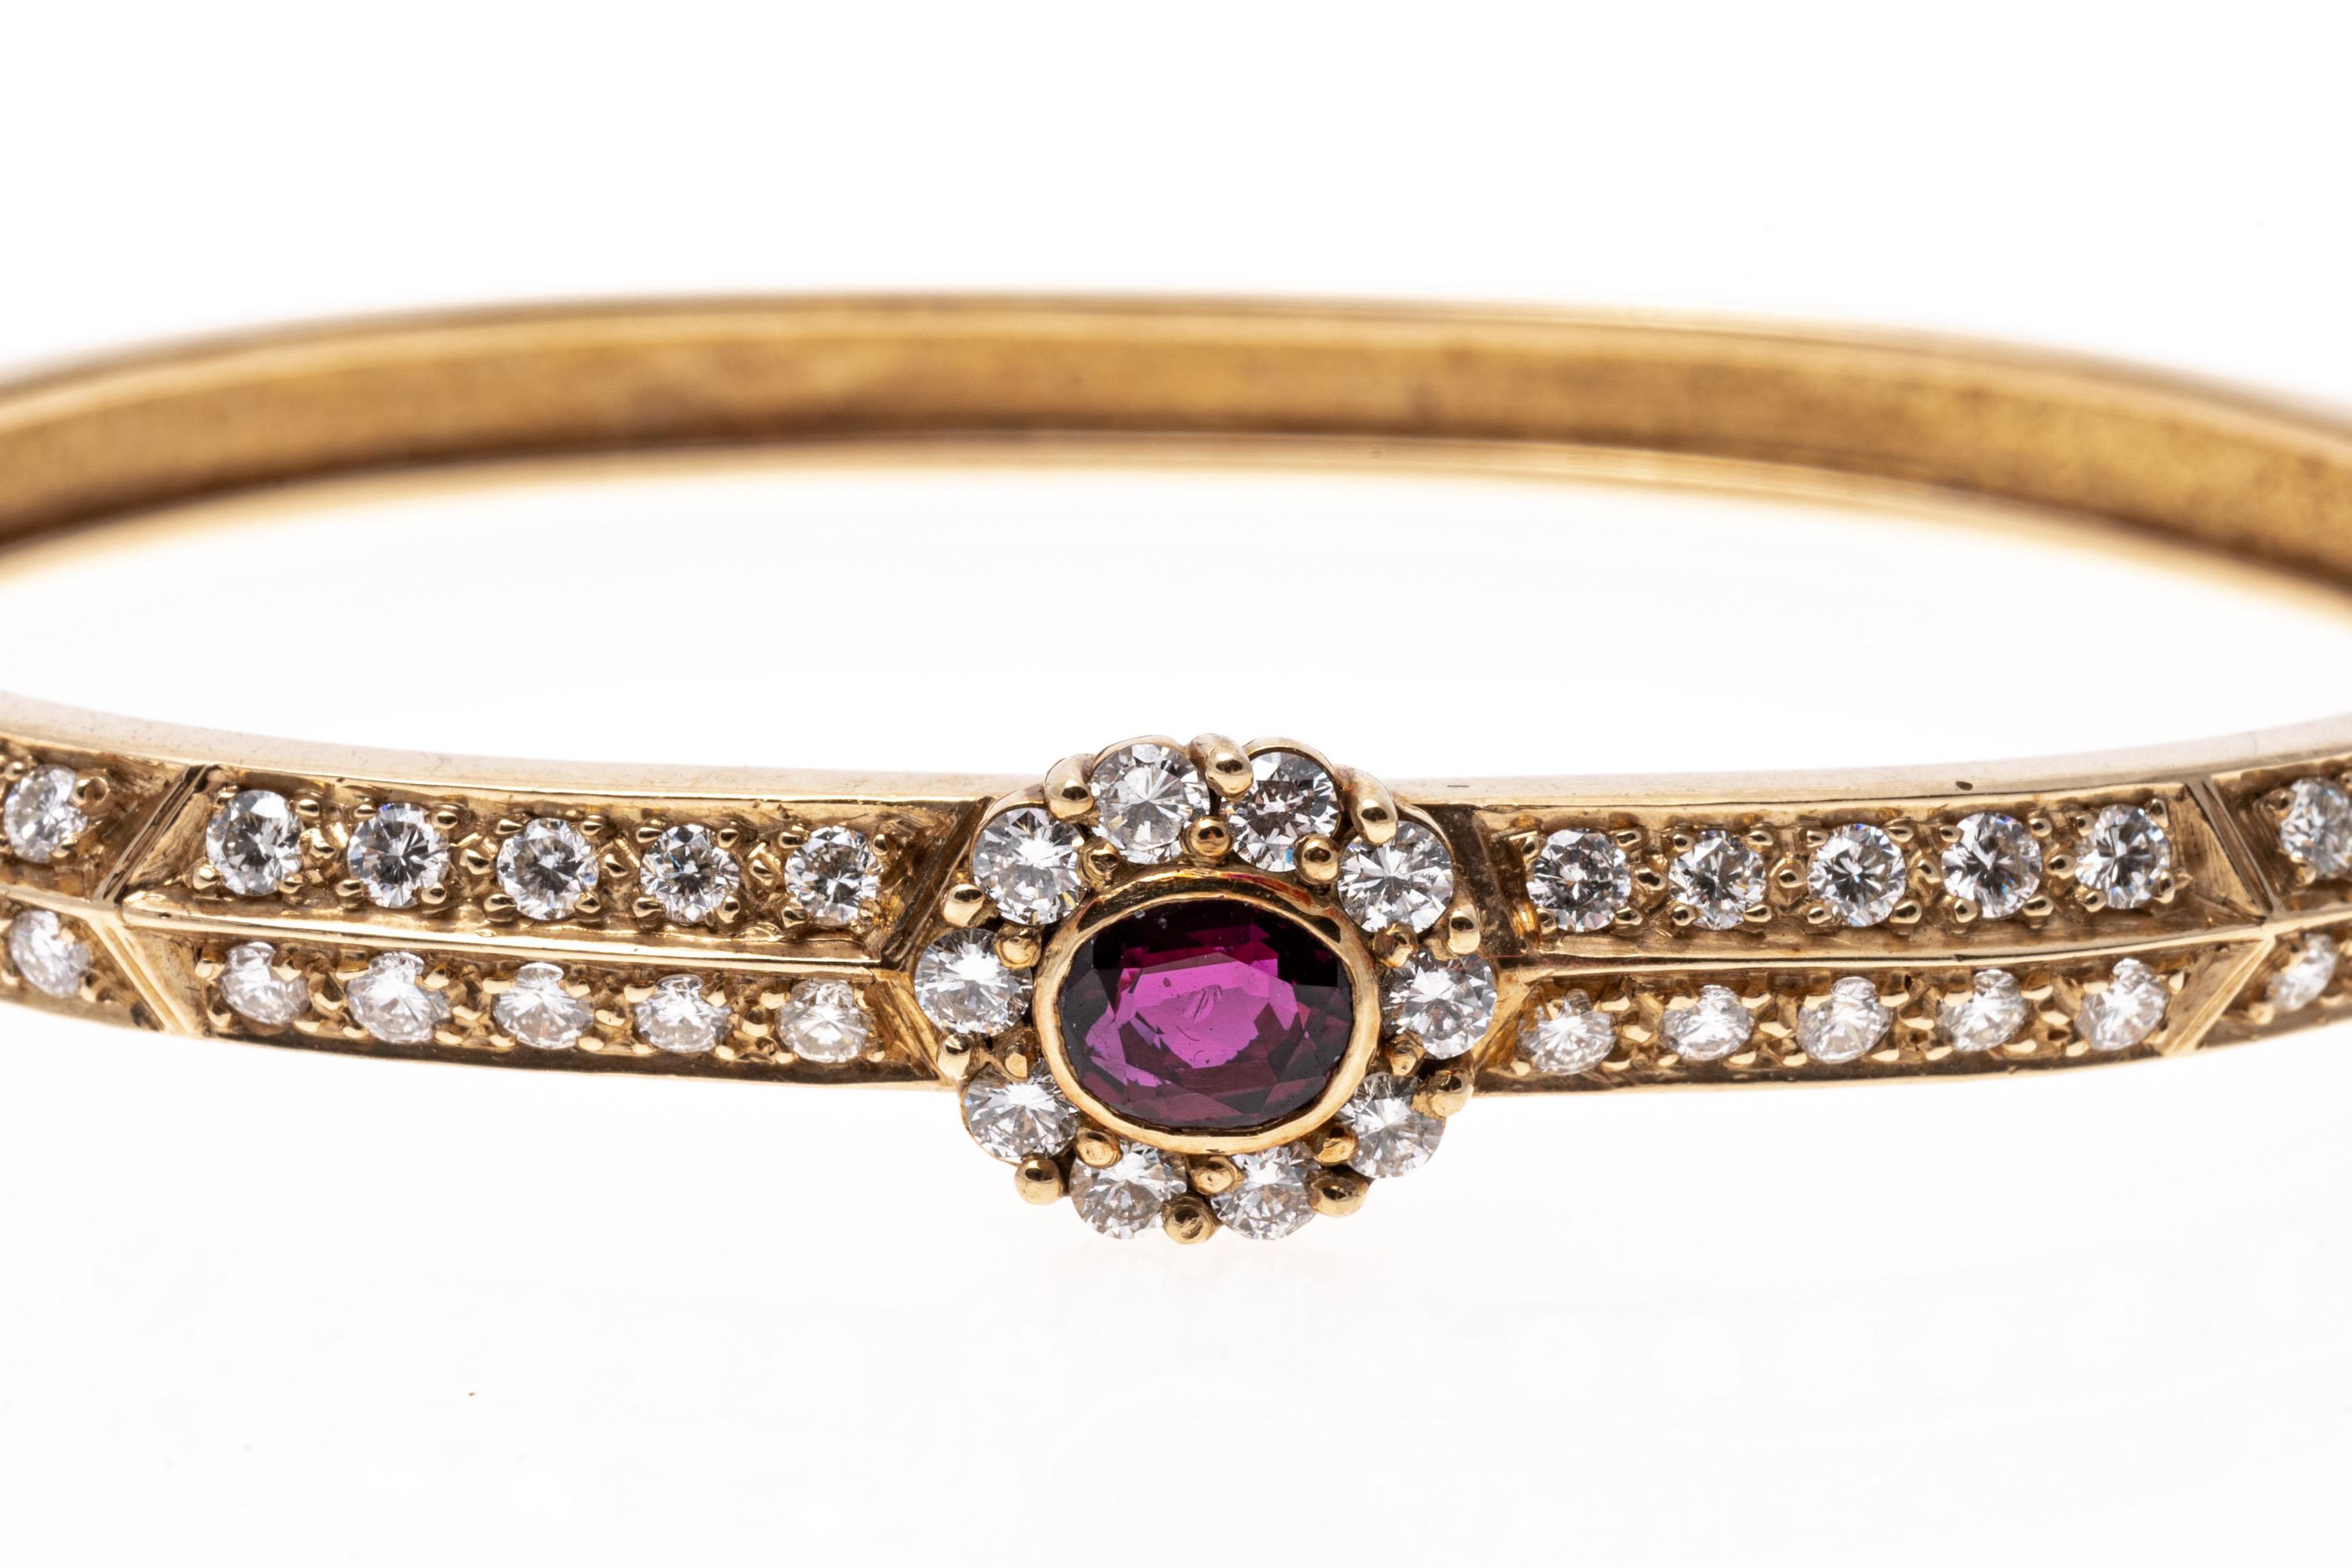 This charming 14K yellow gold bracelet displays two rows of round cut diamonds trailing across the band. Set over the band is an oval ruby framed within a halo of diamonds. Diamonds are approximately 1.5 TCW and the Ruby is approximately 0.5 cts.